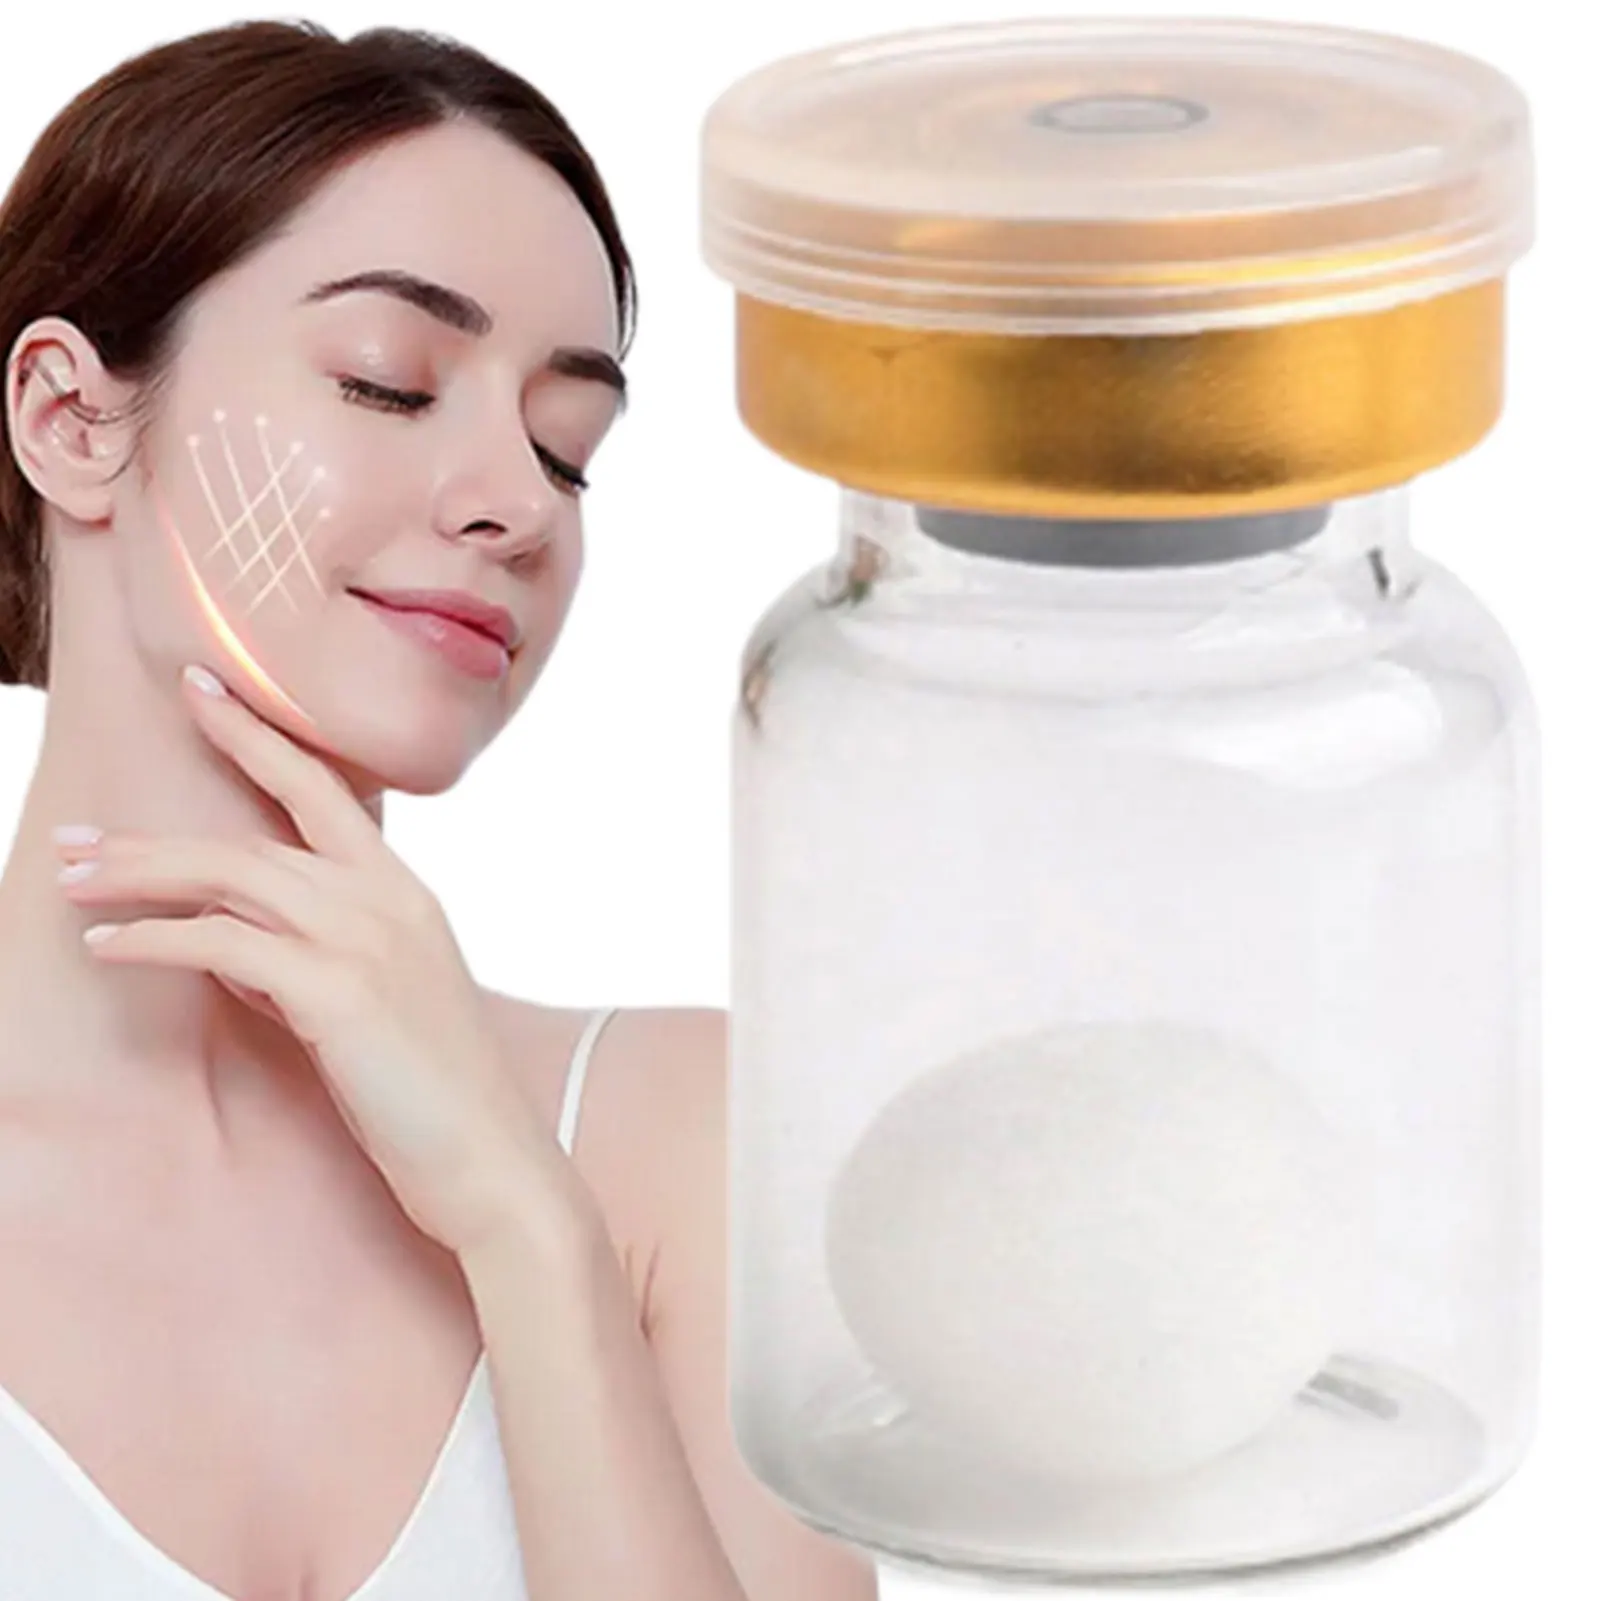 Japan Pure Collagen Ball Natural Silk Protein Collagen Essence Removal Fine Lines Firming Collagen Silk Ball Skin Care For Women original mikasa volleyball v200w fivb official game ball for the fivb in 2019 japan fivb approve official volleyball